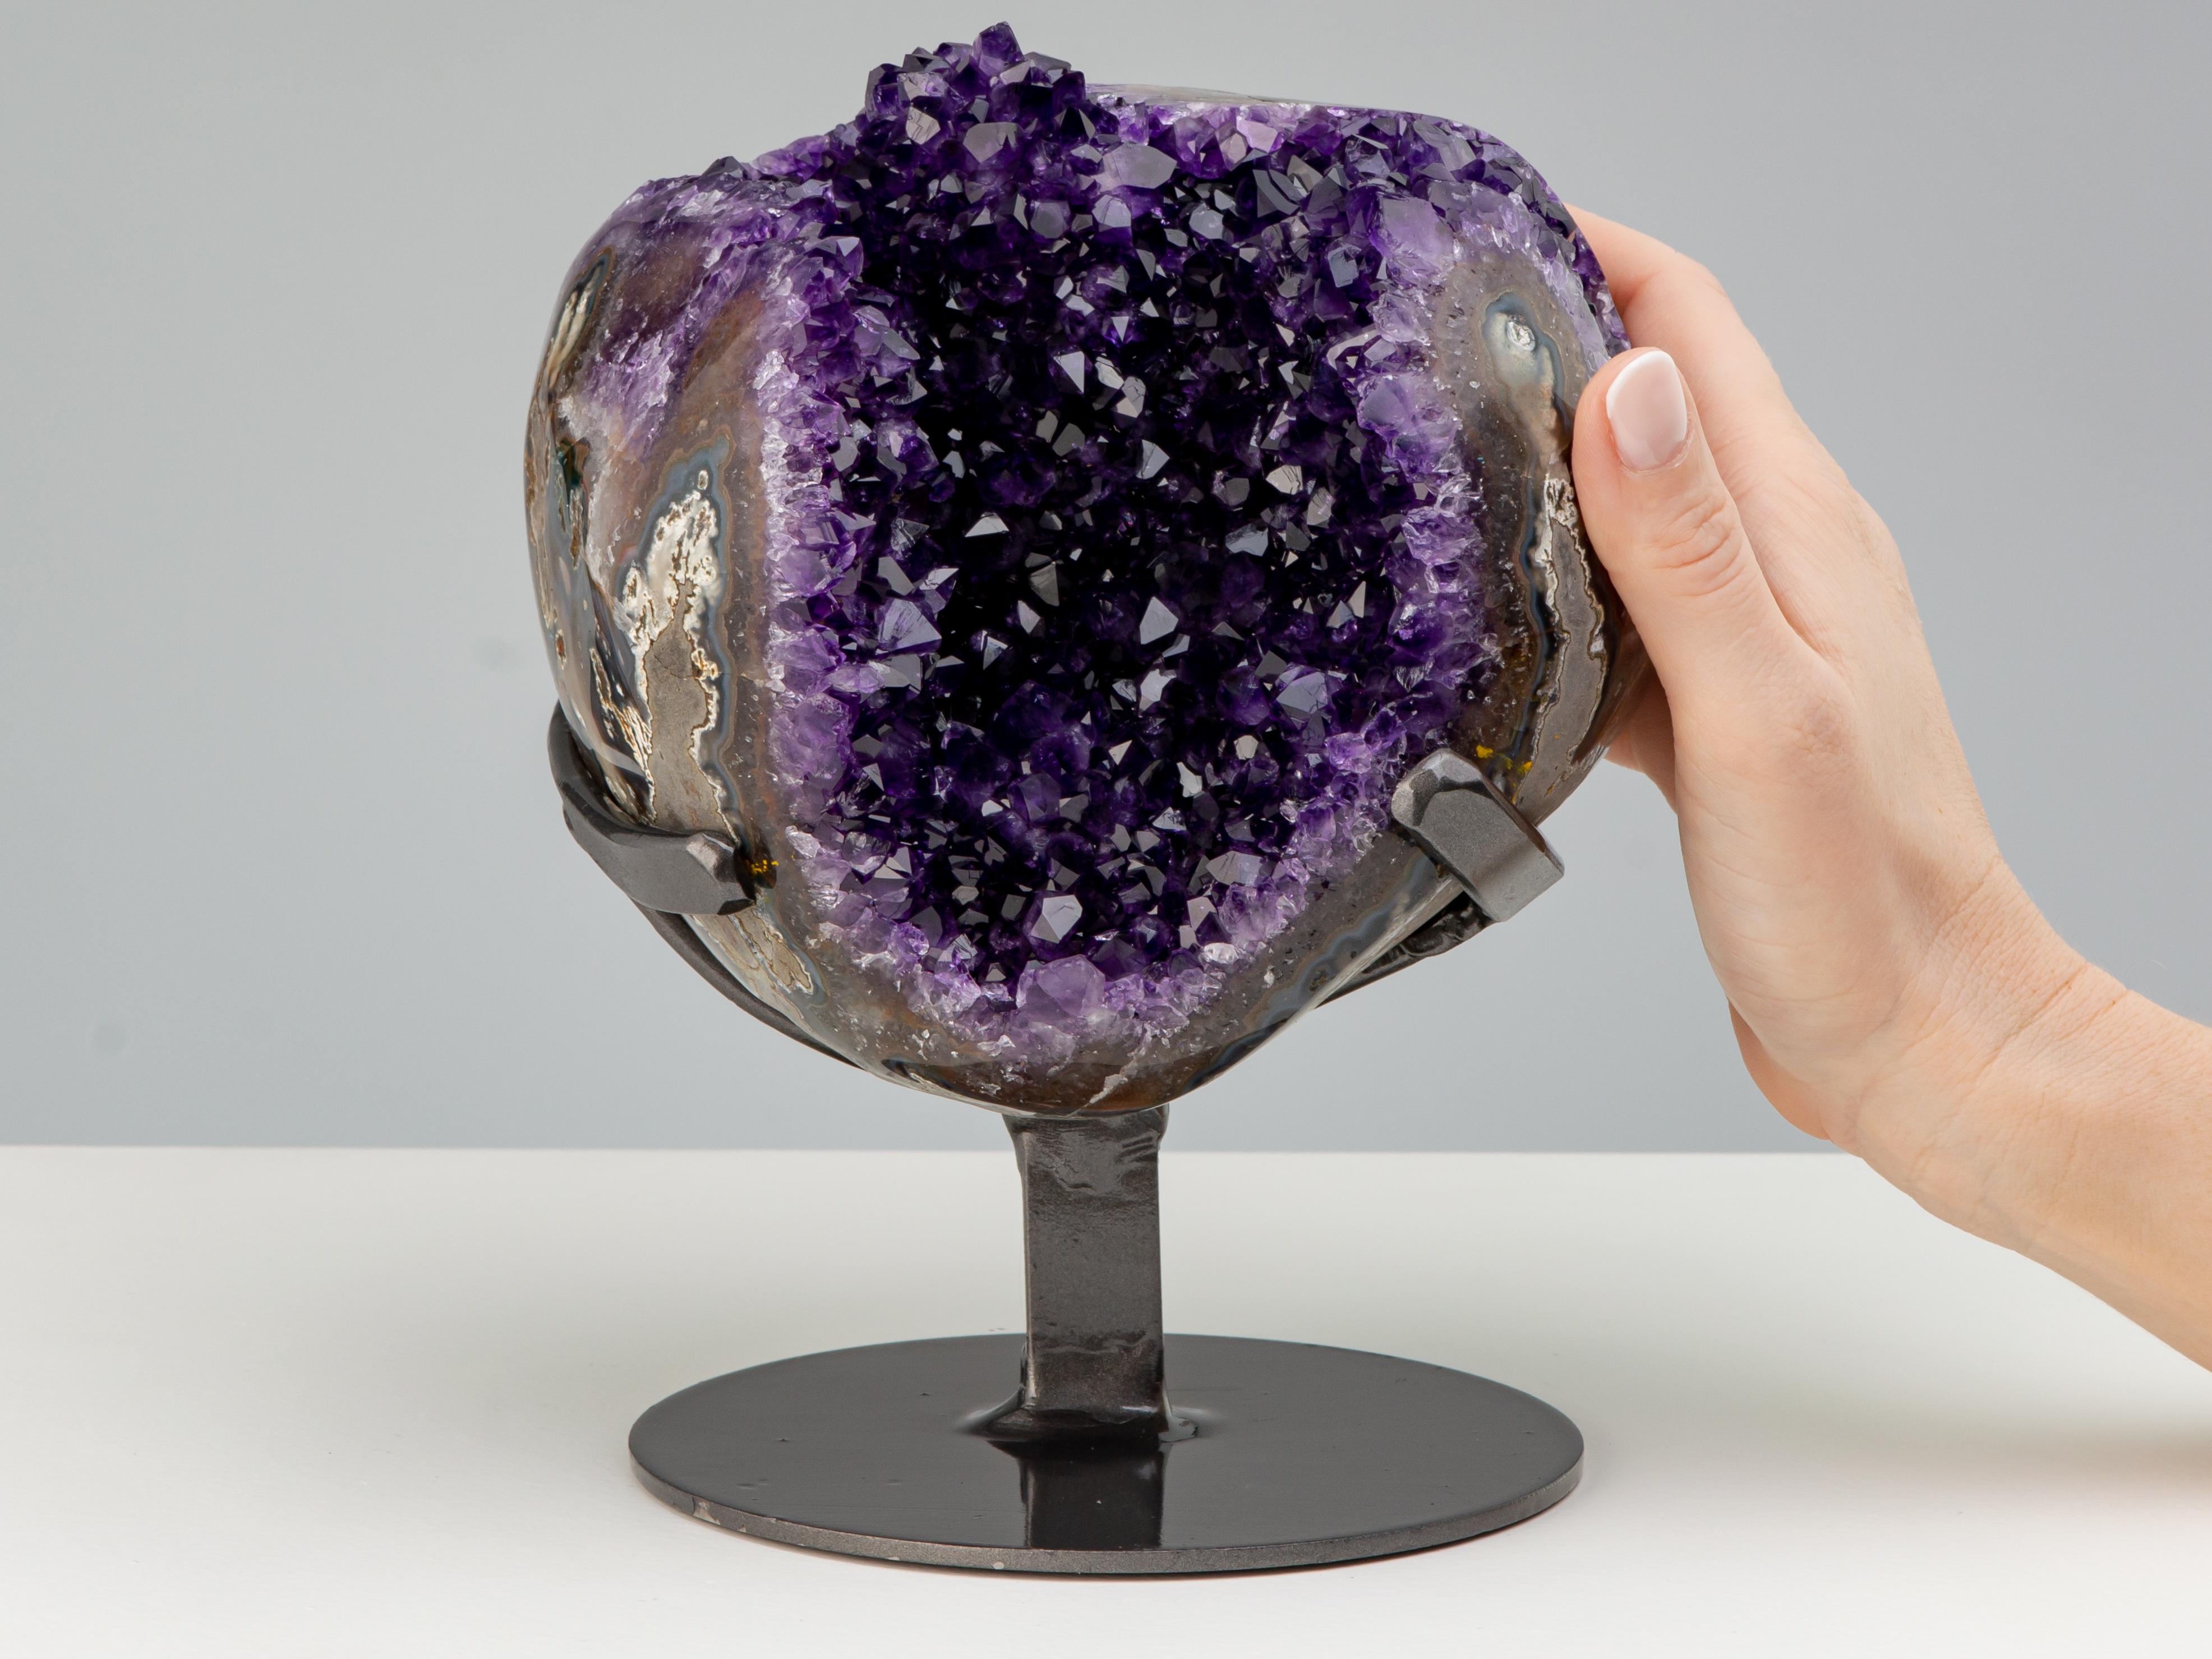 A stunning spherical shaped geode of a deep purple amethyst. The piece is of a wonderful example of a three dimensional geode with particularly thick agate border, revealing grey agate jasper and white quartz. The multicoloured frame intensifies the